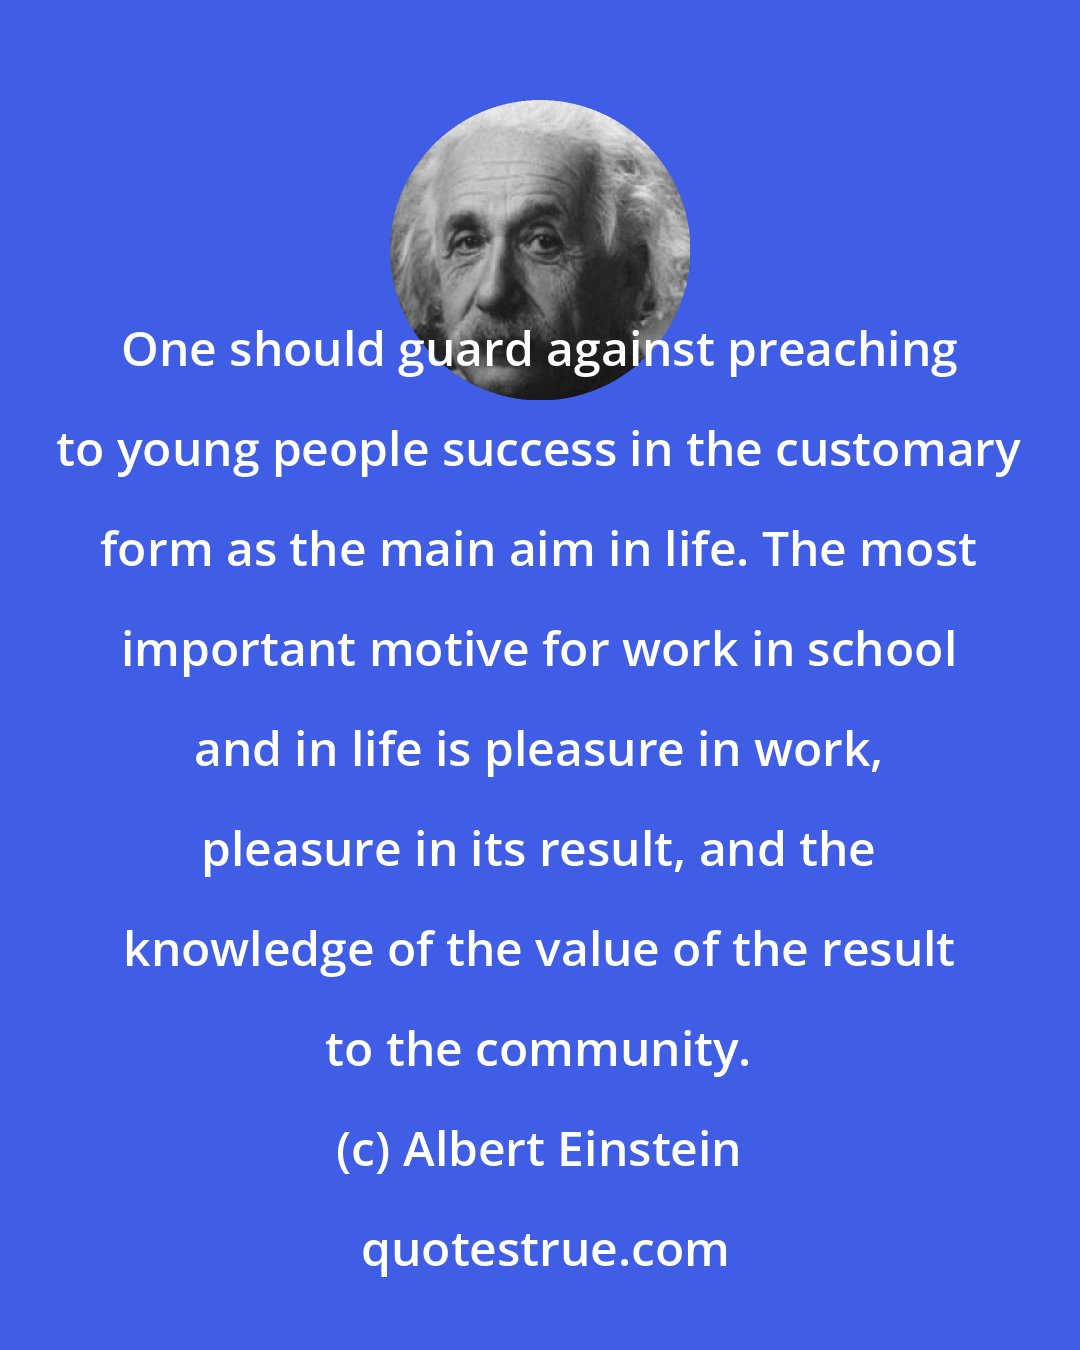 Albert Einstein: One should guard against preaching to young people success in the customary form as the main aim in life. The most important motive for work in school and in life is pleasure in work, pleasure in its result, and the knowledge of the value of the result to the community.